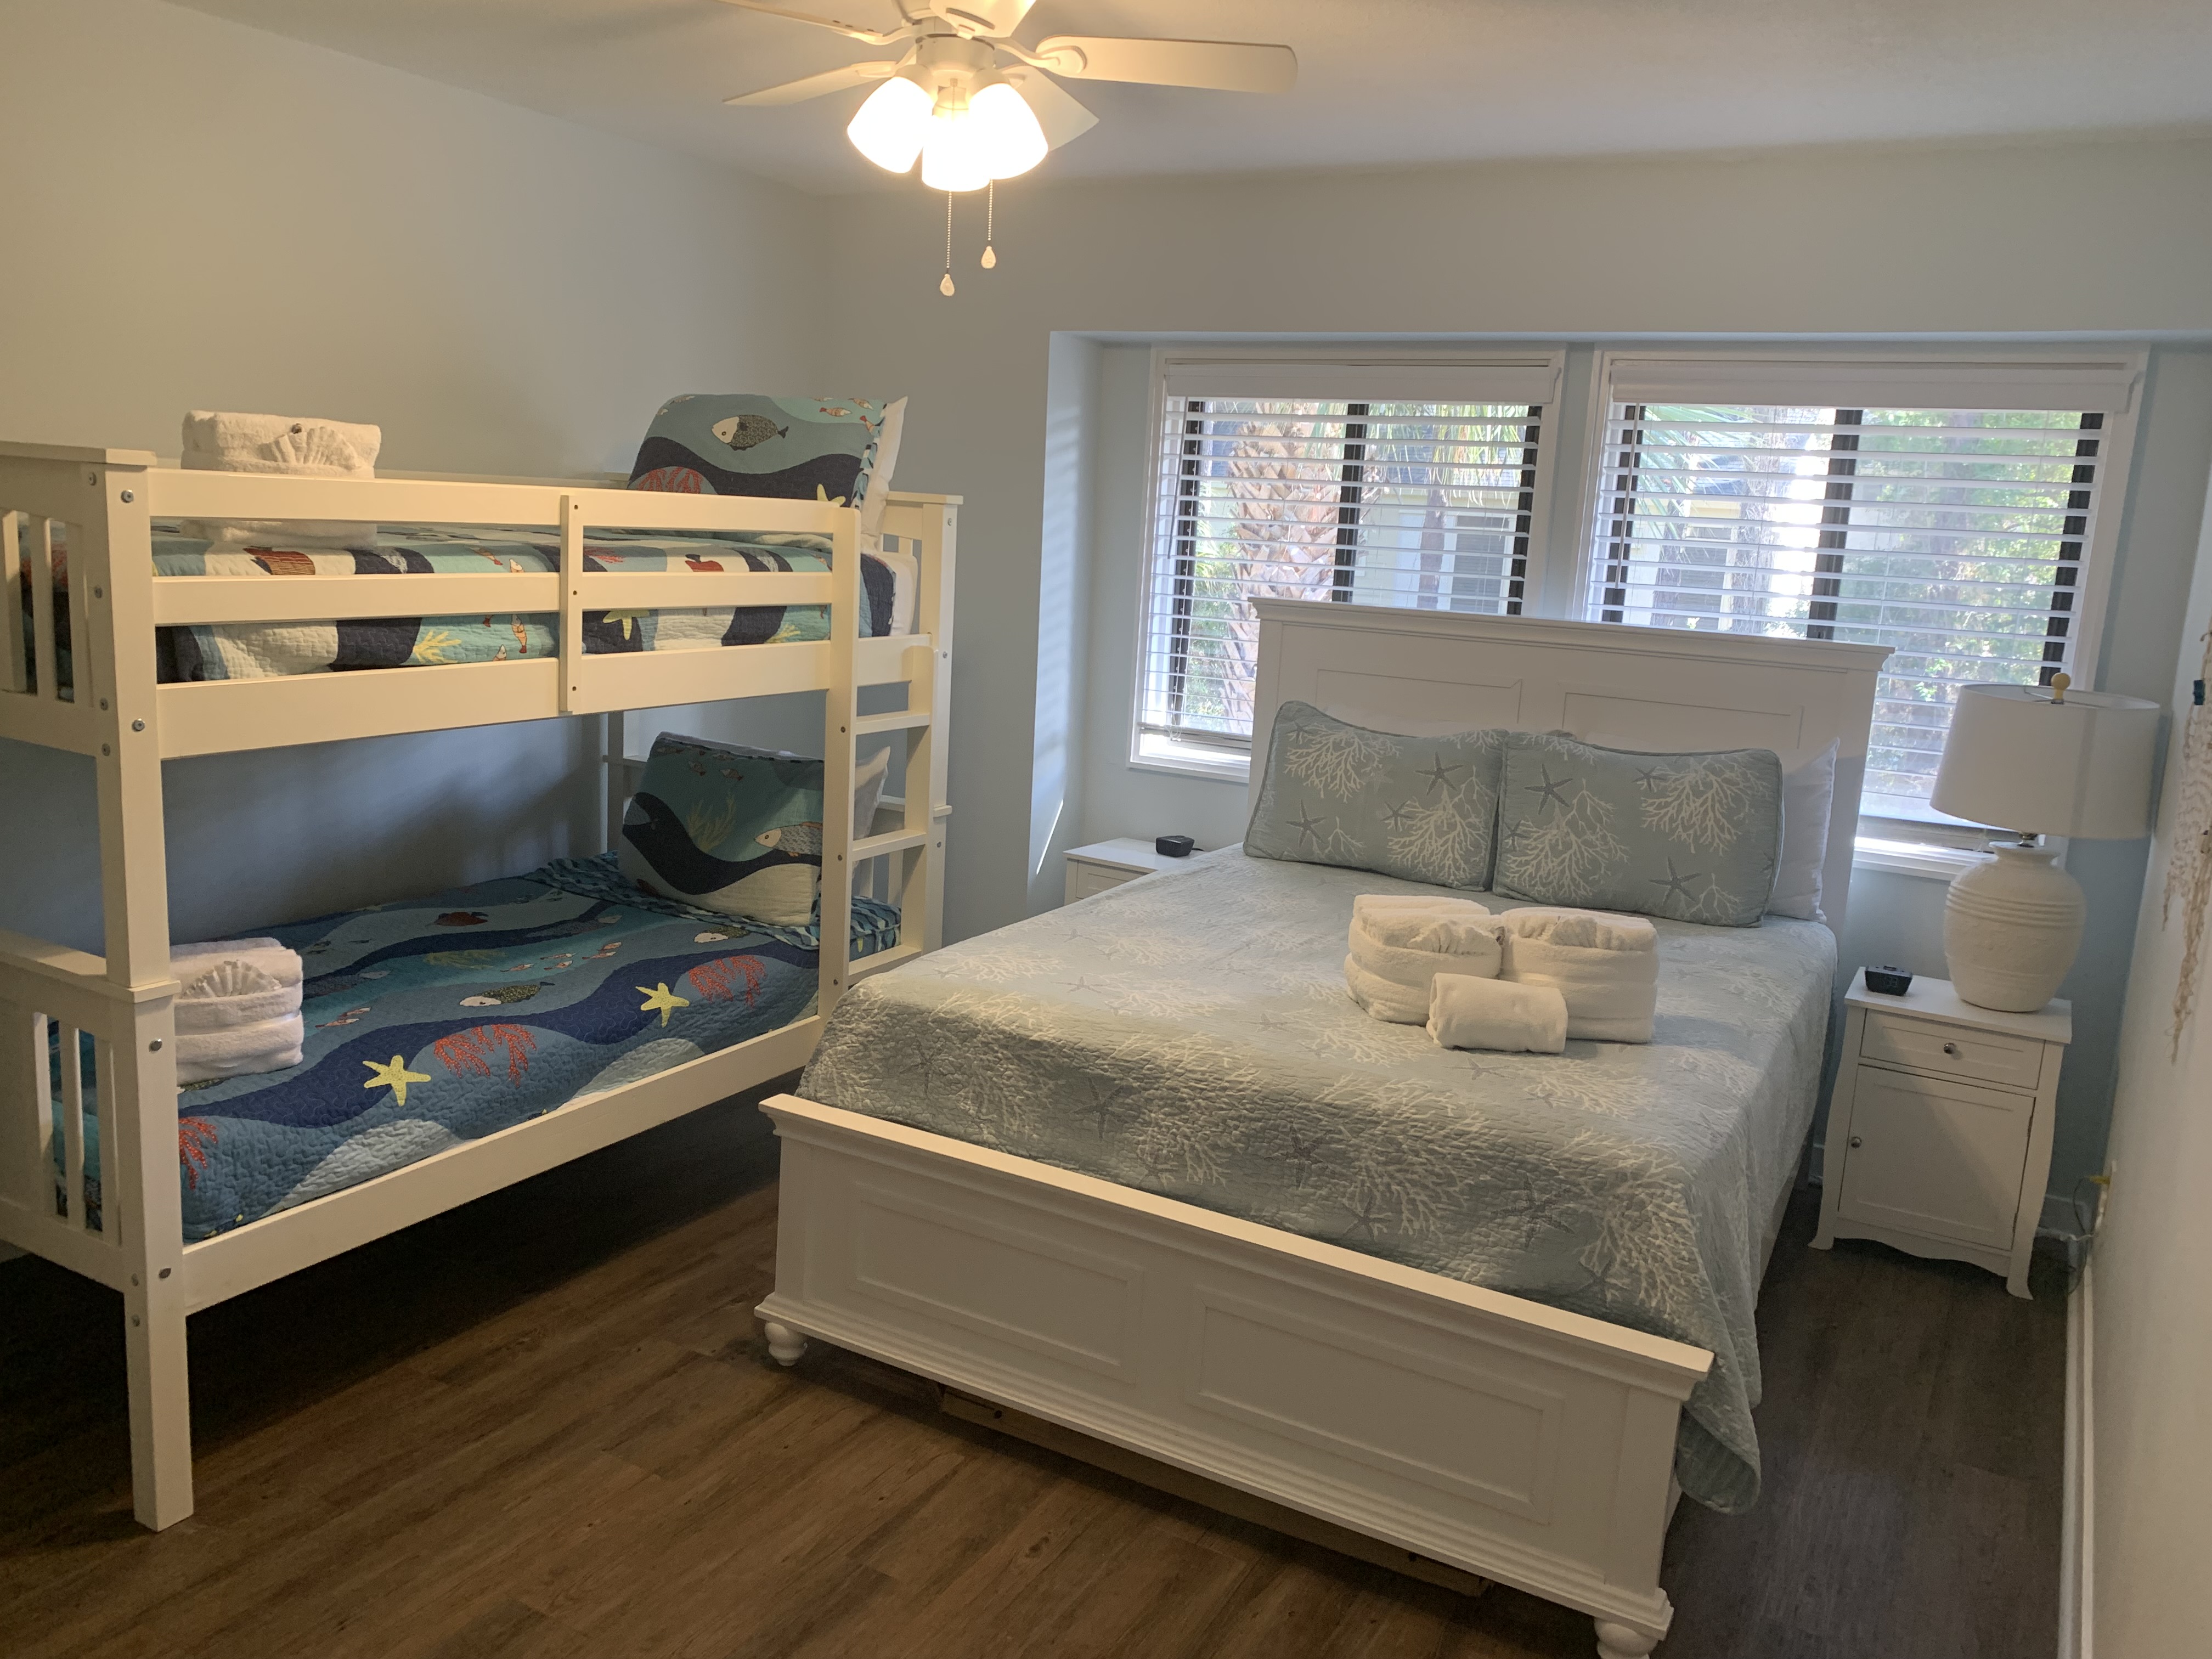 1405-South-Beach-VillasBunk-Bed-with-Queen-Bed-12341-big.jpeg